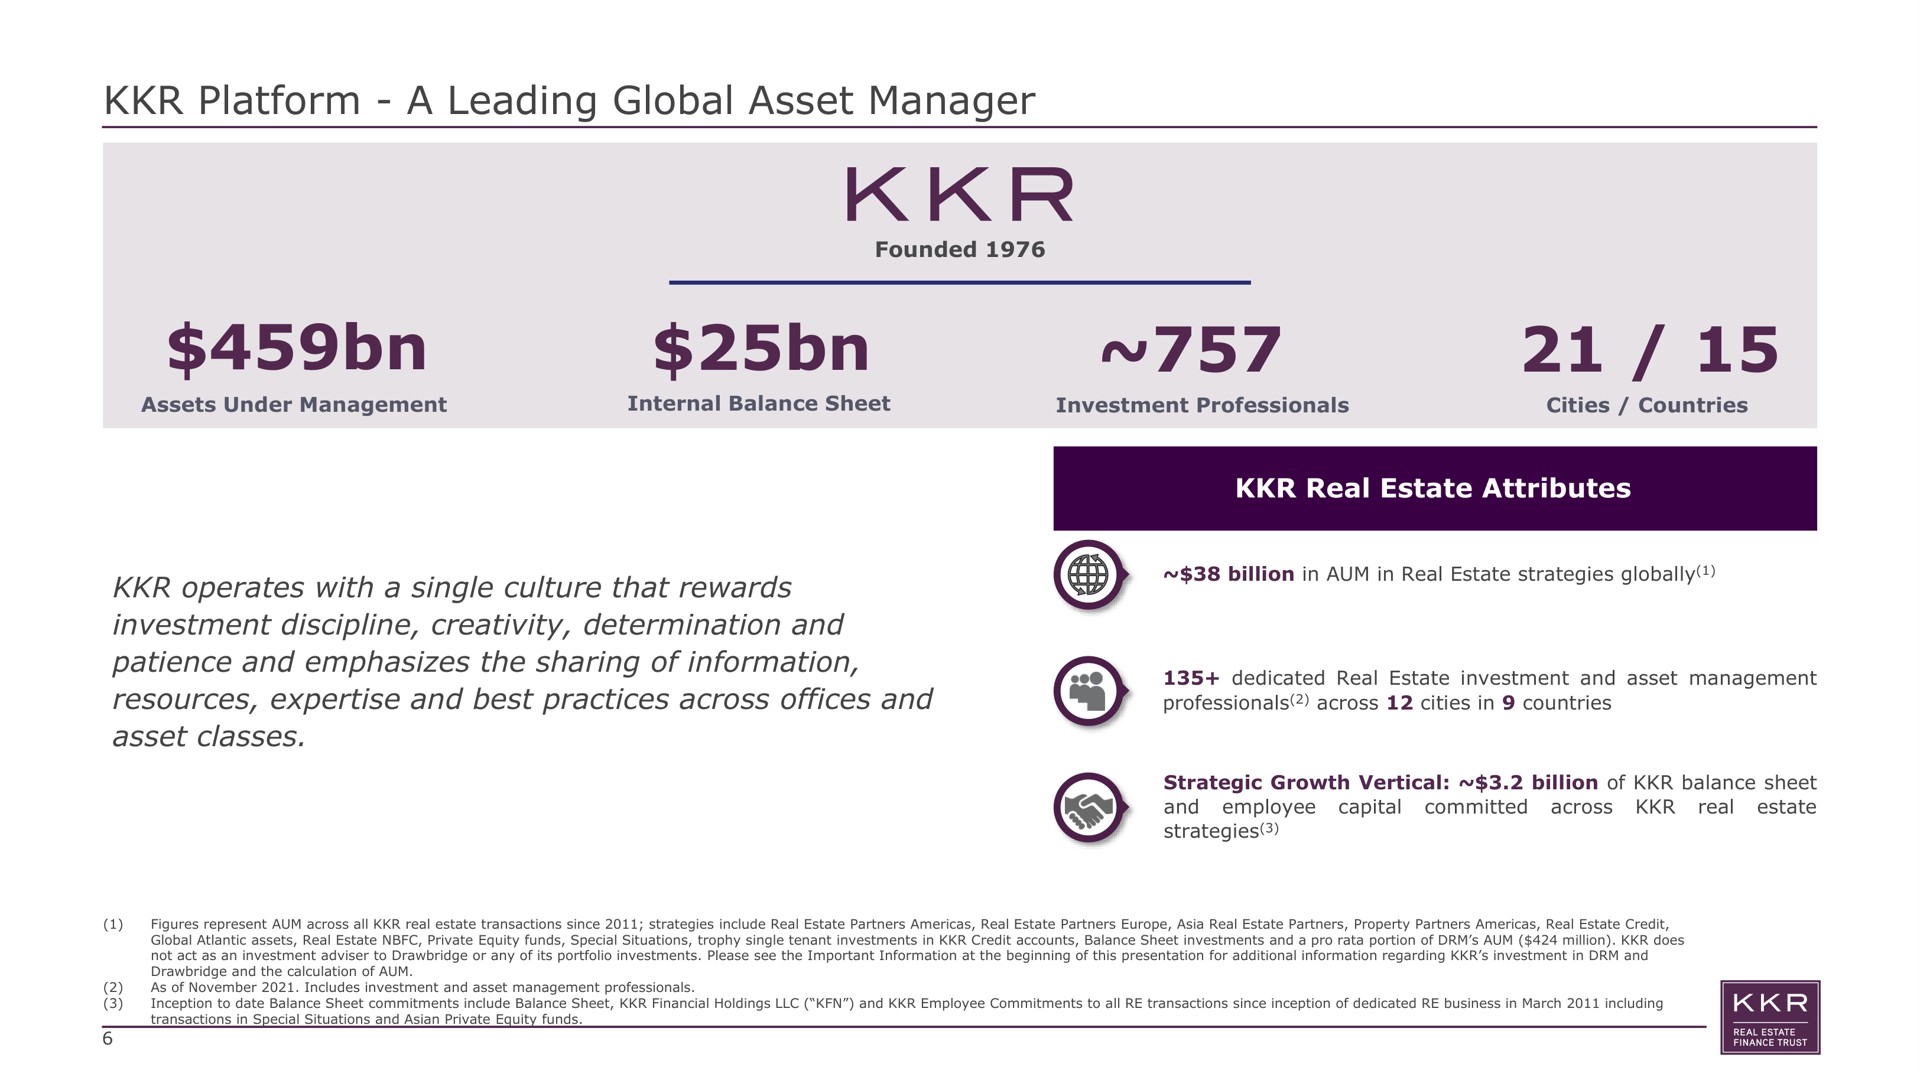 platform a leading global asset manager attributes real estate attributes operates with a single culture that rewards investment discipline creativity determination and patience and emphasizes the sharing of information resources and best practices across offices and asset classes arid ally | KKR Real Estate Finance Trust